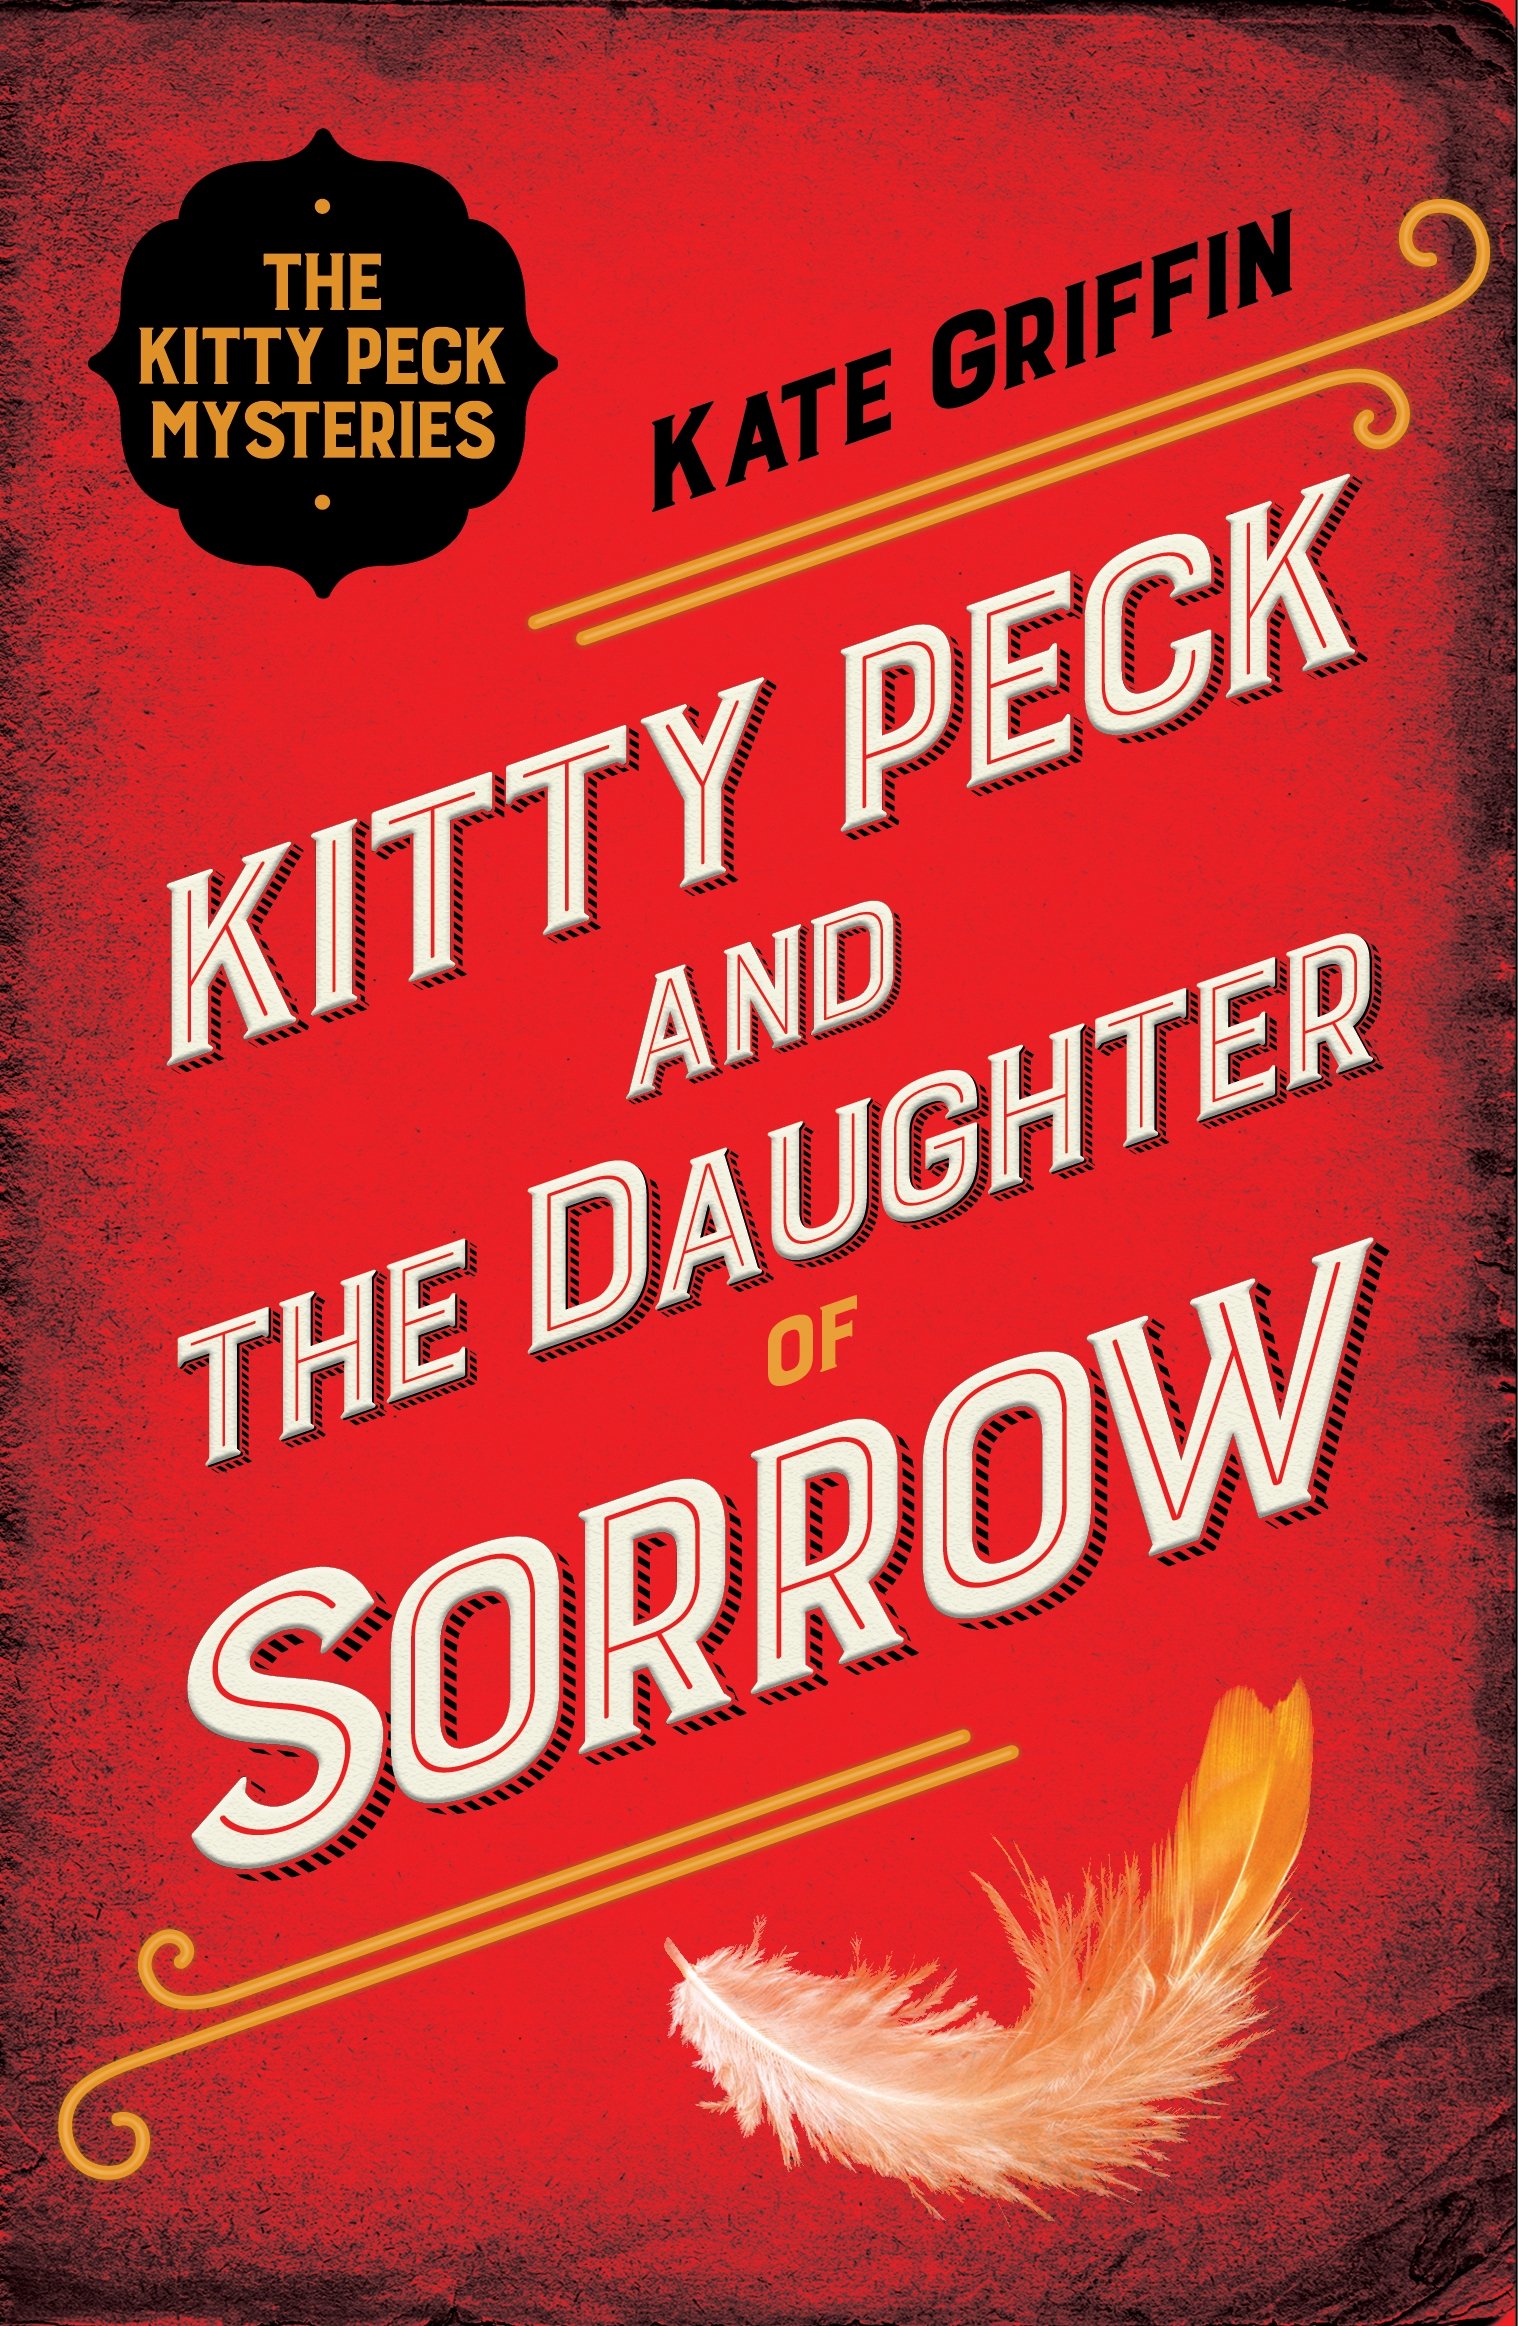 Kitty Peck and the Daughter of Sorrow | Kate Griffin